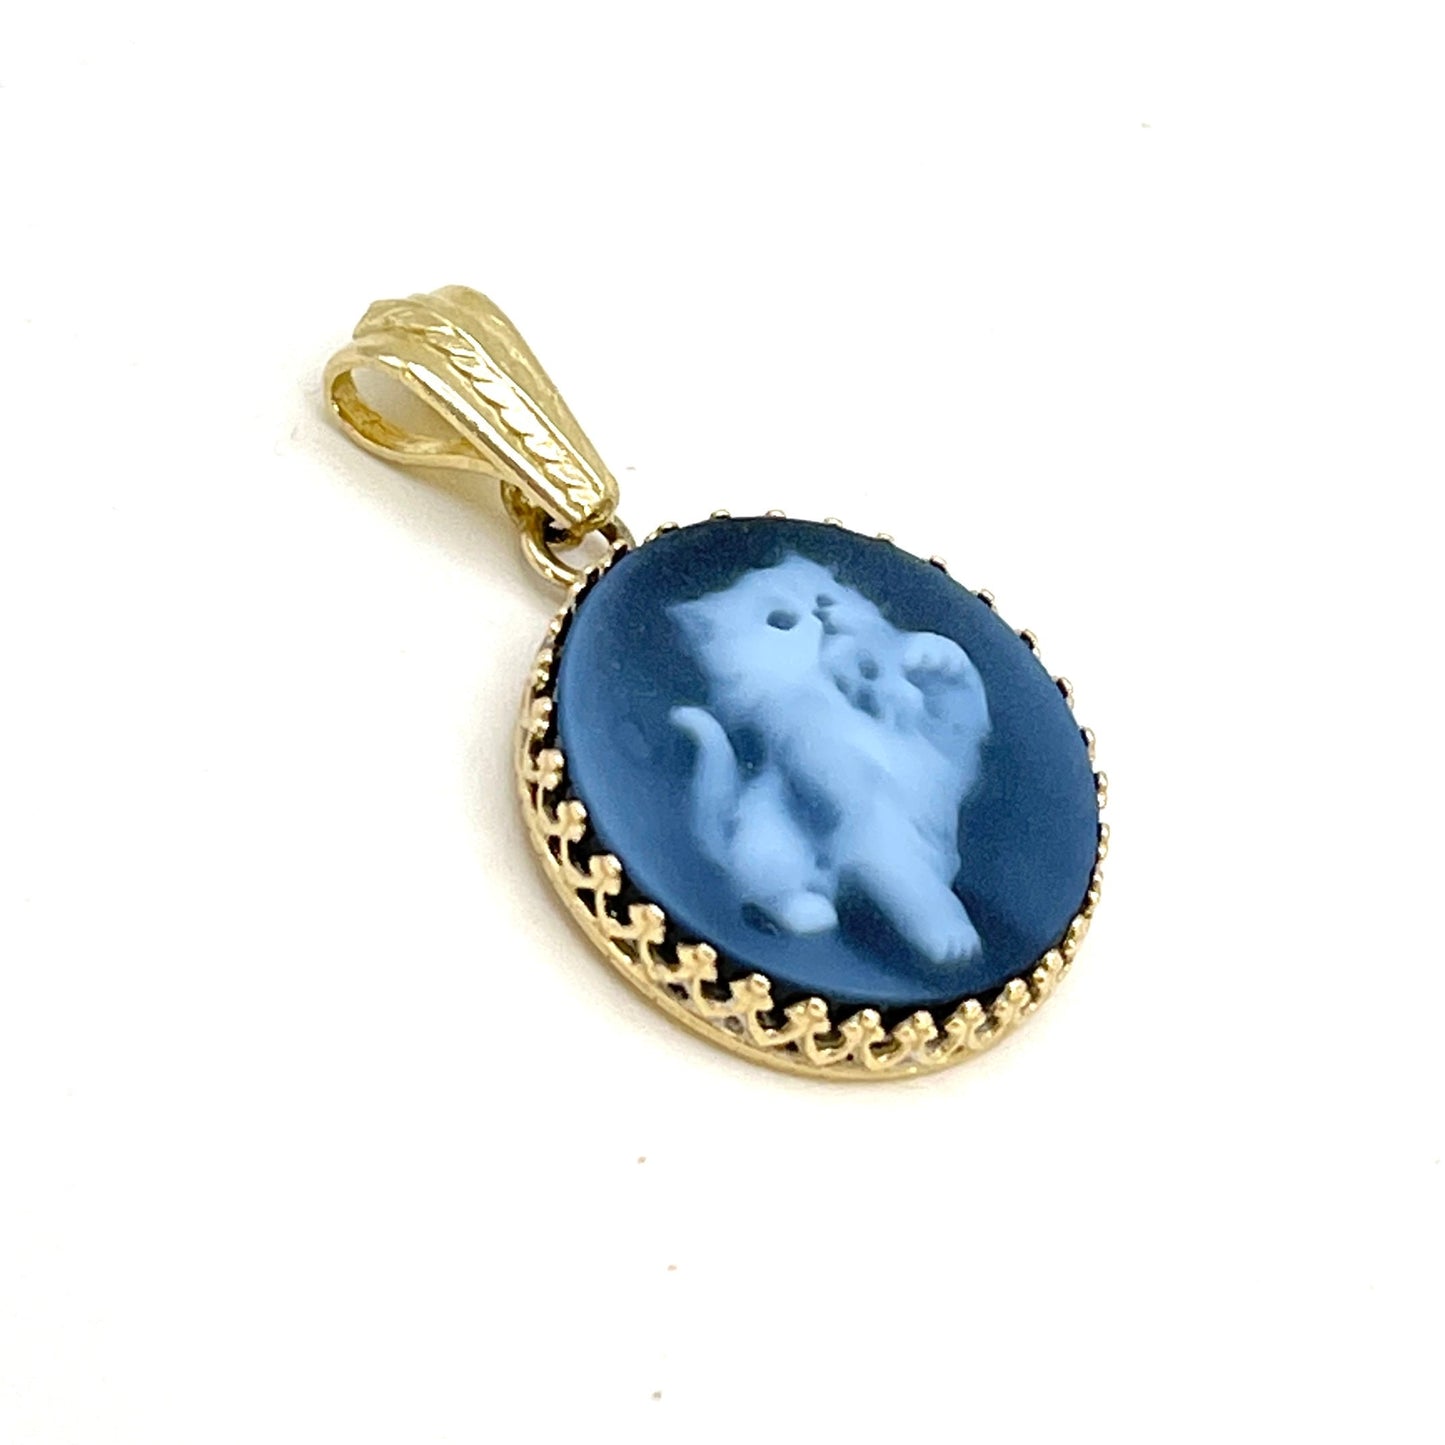 14K Solid Gold Cat Cameo Pendant, 20th Anniversary Gifts for Wife, Gemstone Cameo Jewelry, Unique Cat Necklace, Birthday Gift for Mom